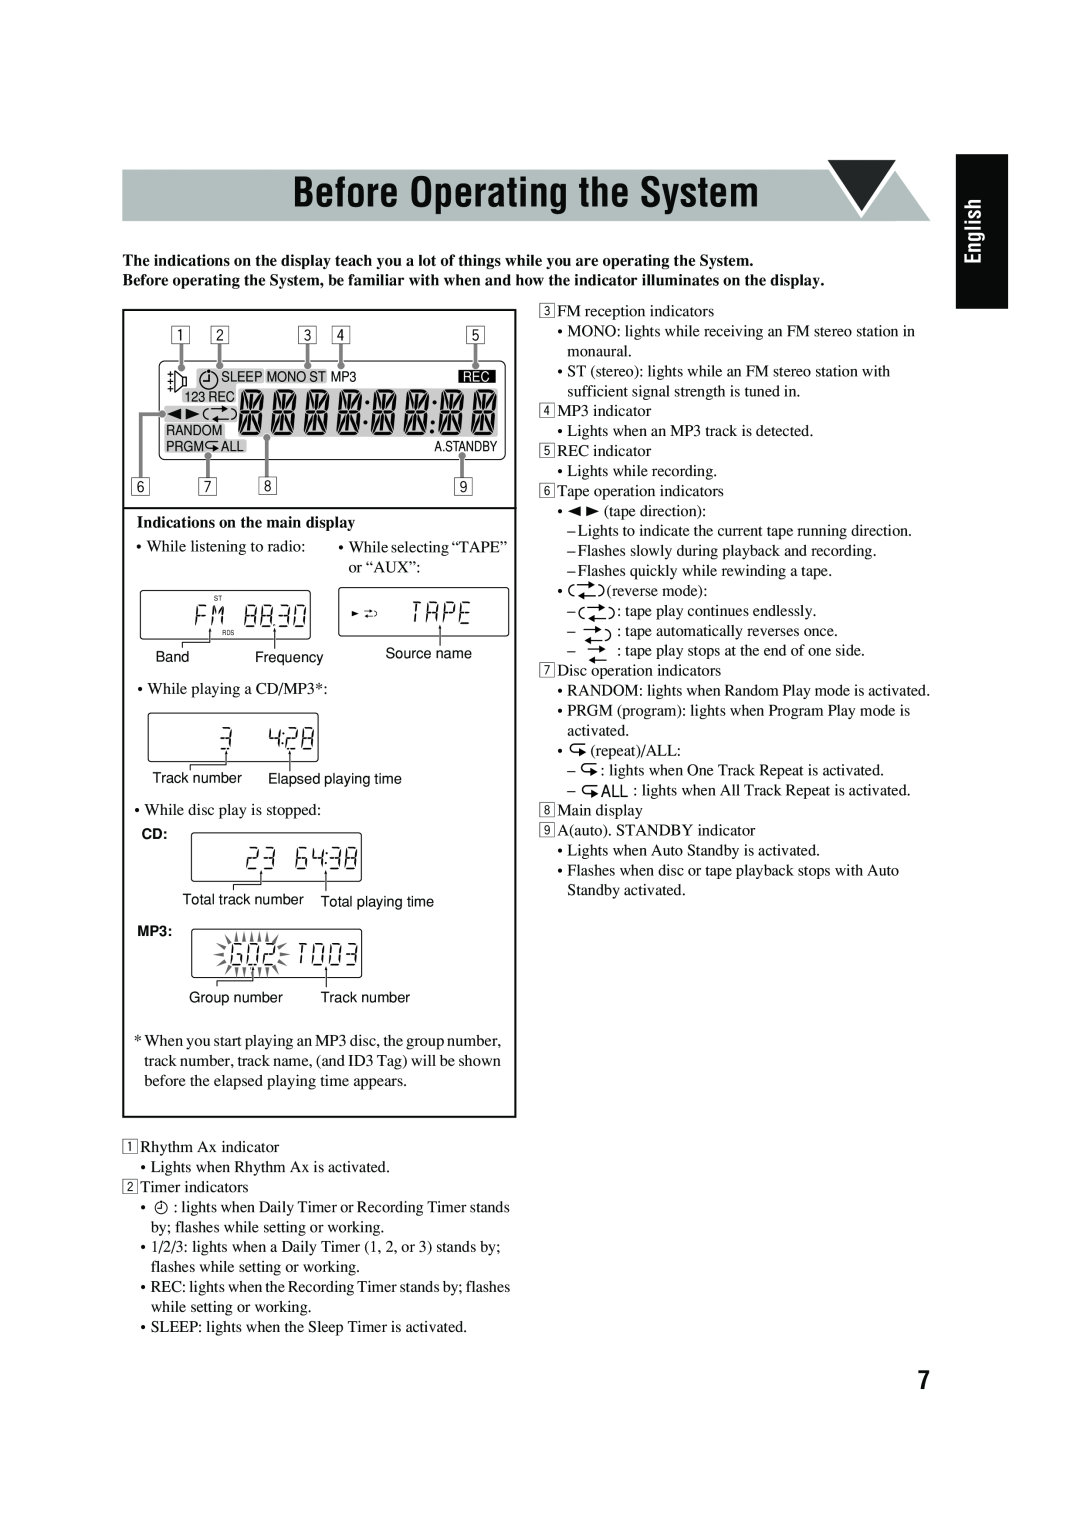 JVC UX-P400 manual Before Operating the System, English, Indications on the main display 